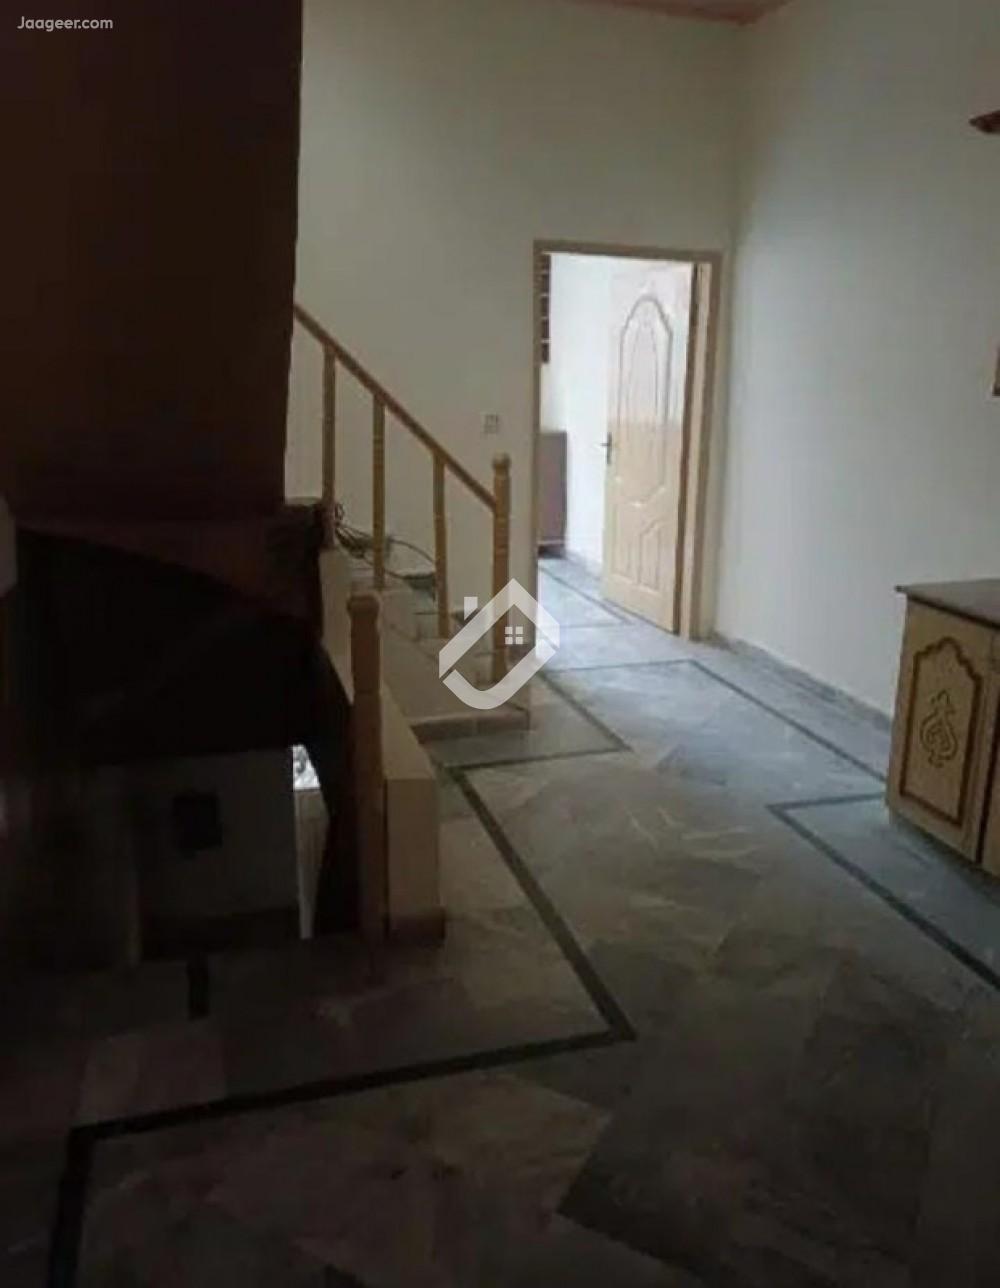 View  2.5 Marla Double Storey House For Rent At Ghazi Rd Lahore in Ghazi Rd, Lahore